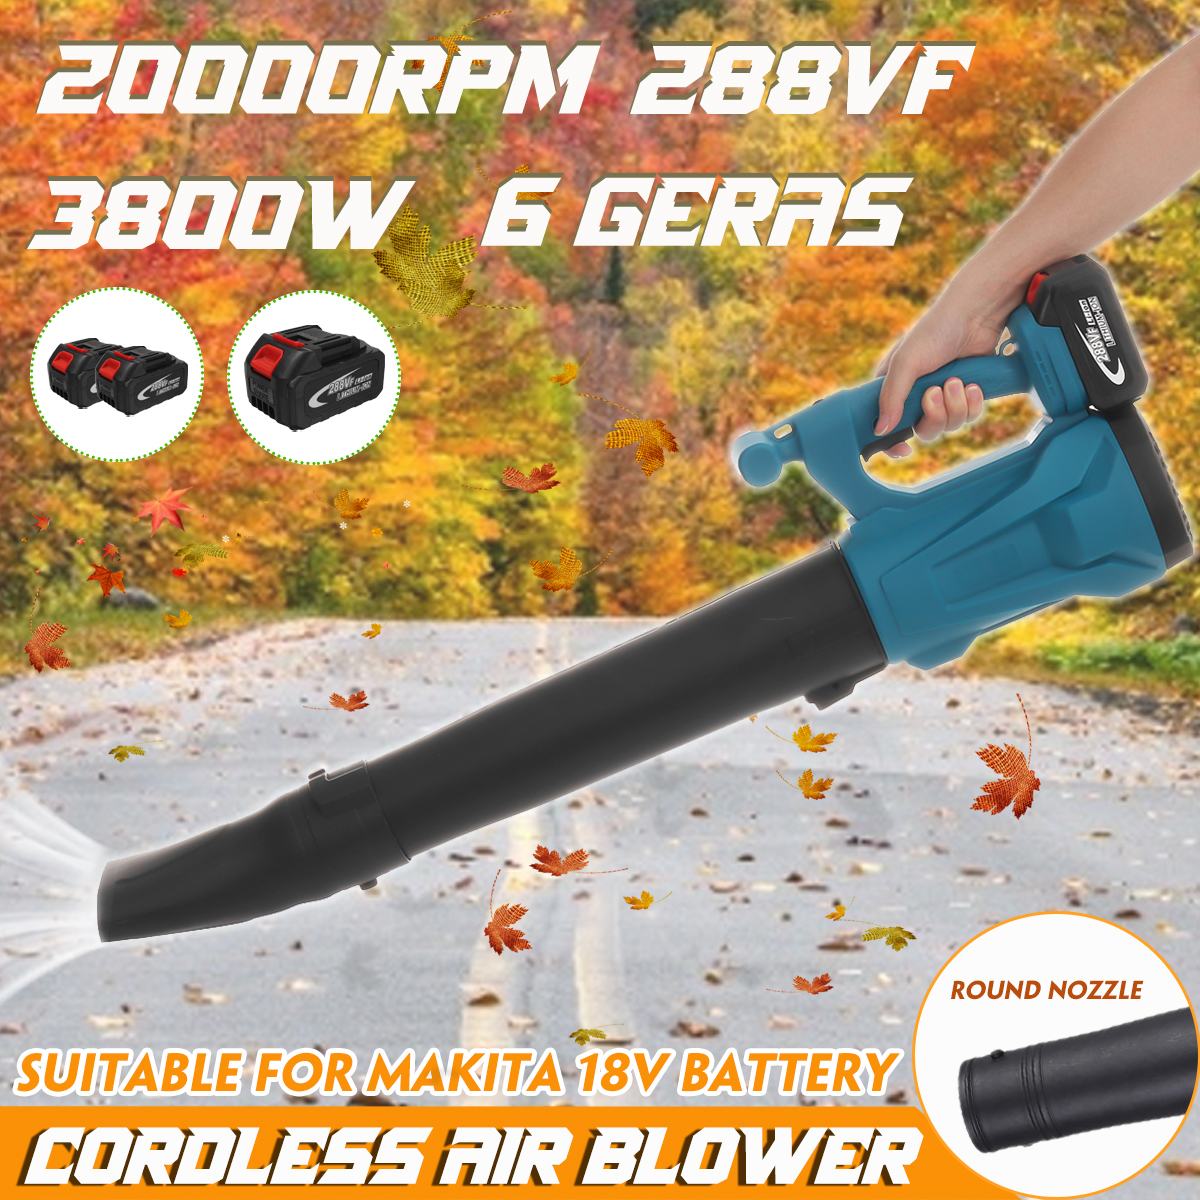 Cordless-Electric-Air-Blower-Vacuum-Cleaning-Dust-Collector-Cleaner-Leaf-Blower-W-None-or1or2-Batter-1879557-1